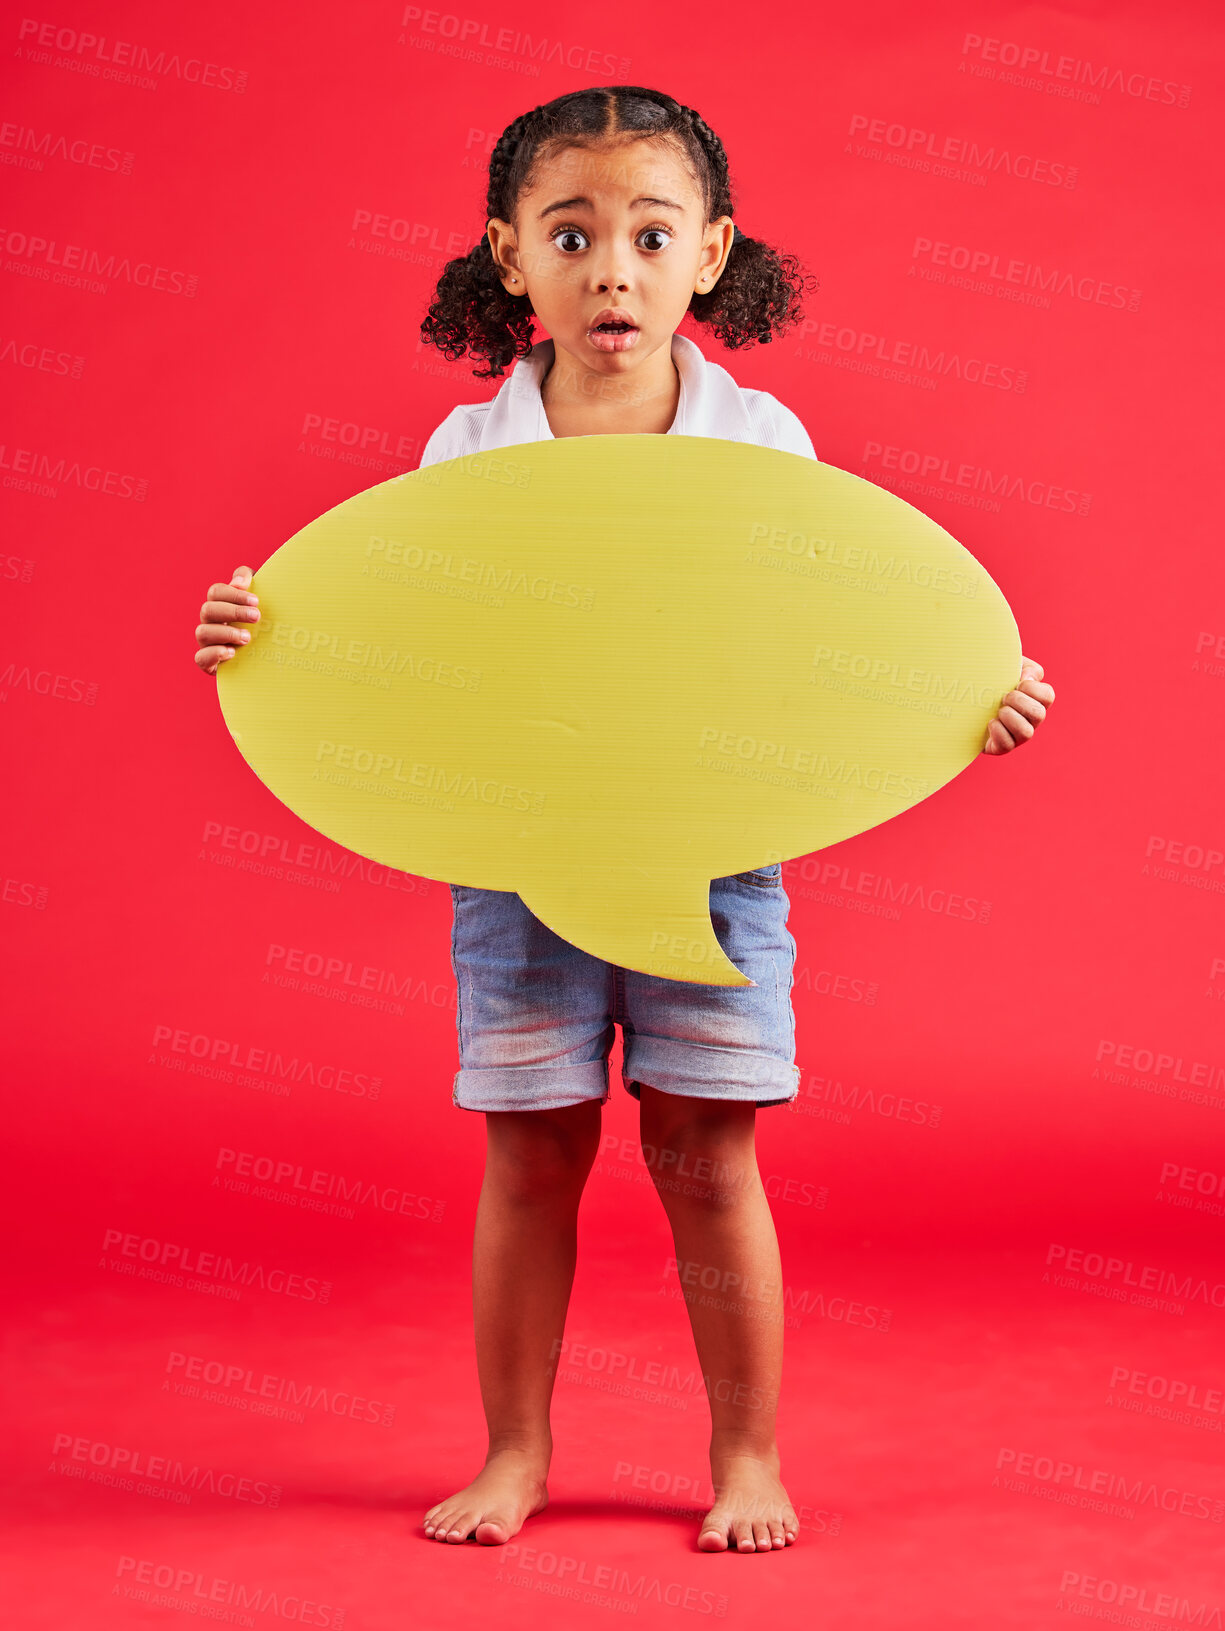 Buy stock photo Shocked, child or portrait of speech bubble ideas, opinion or vote on isolated red background in social media news or wow face. Surprised, girl or kid on banner paper, mockup poster or omg review